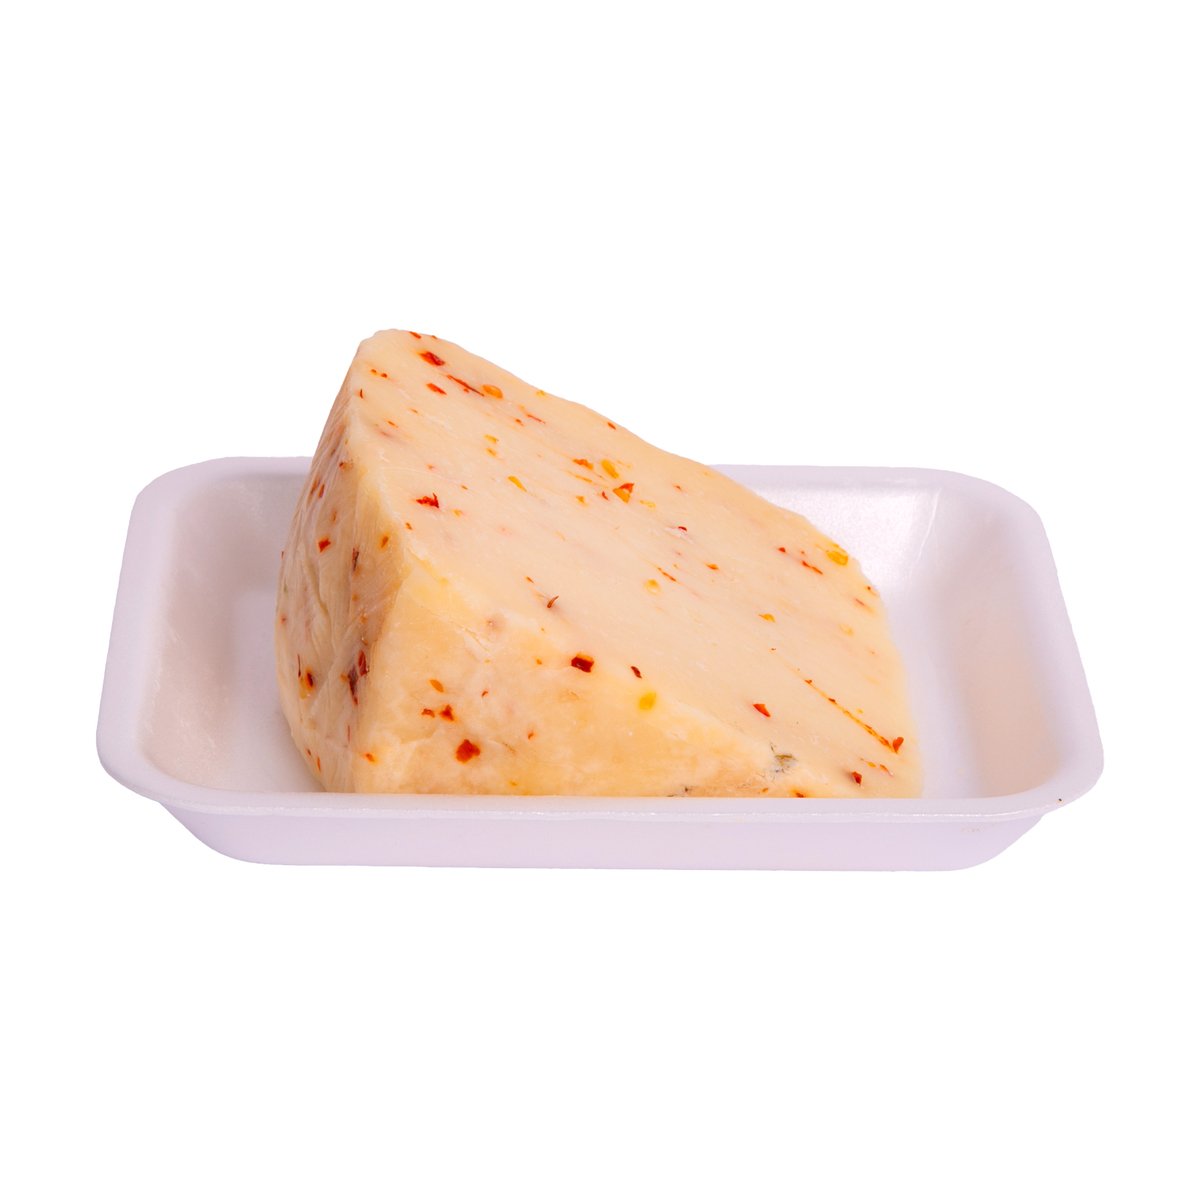 Emirates Farm Toma Cow Cheese Spicy 300 g